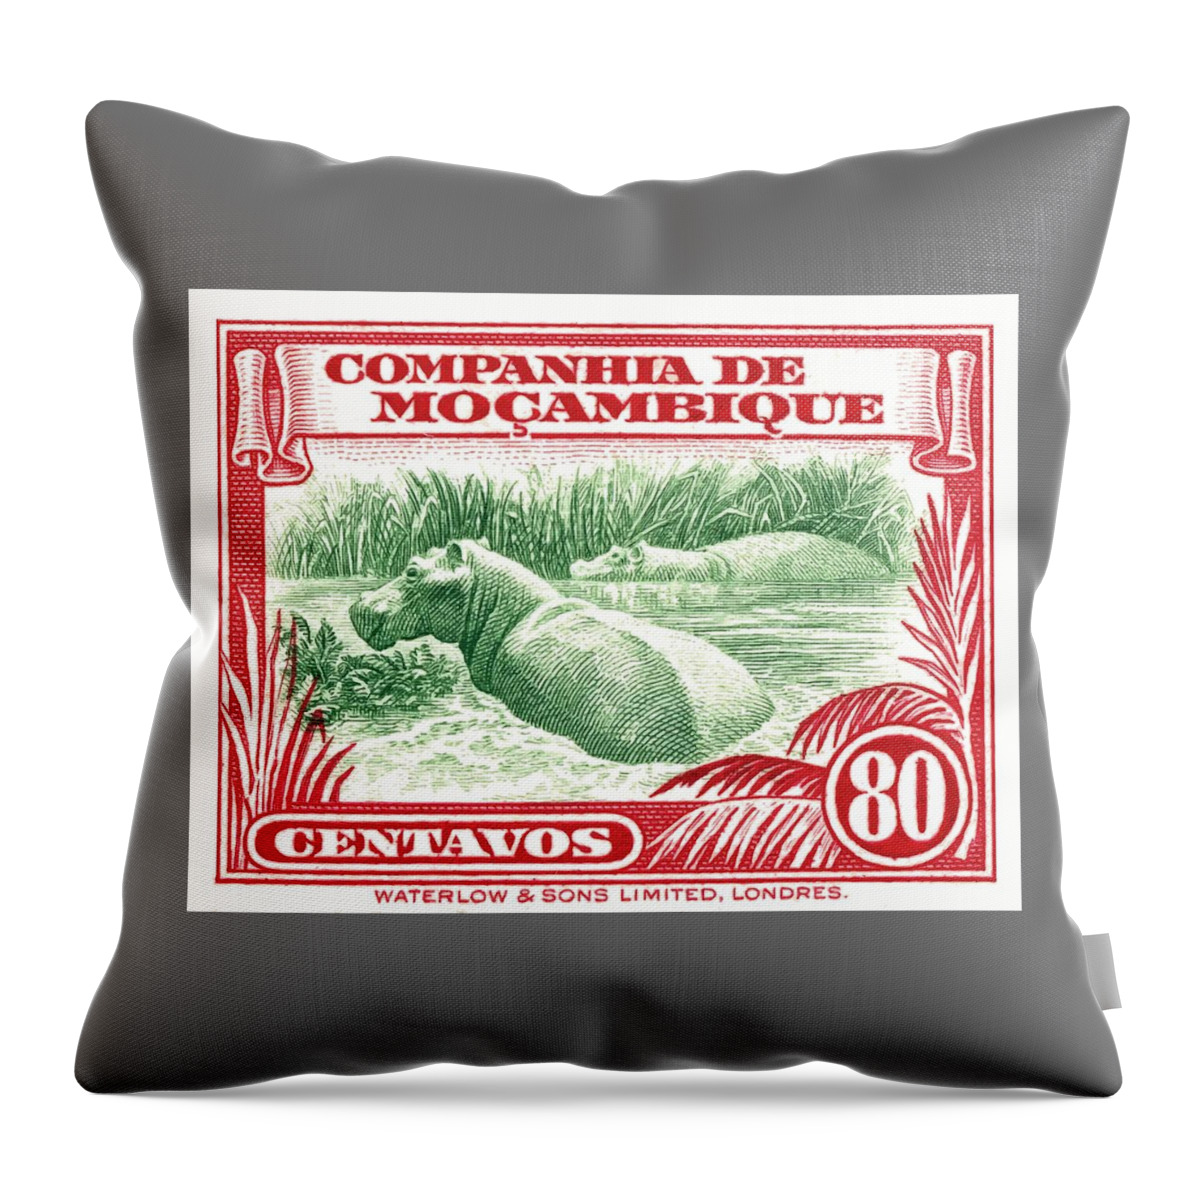 Mozambique Company Throw Pillow featuring the digital art 1937 Mozambique Hippopotamus Stamp by Retro Graphics